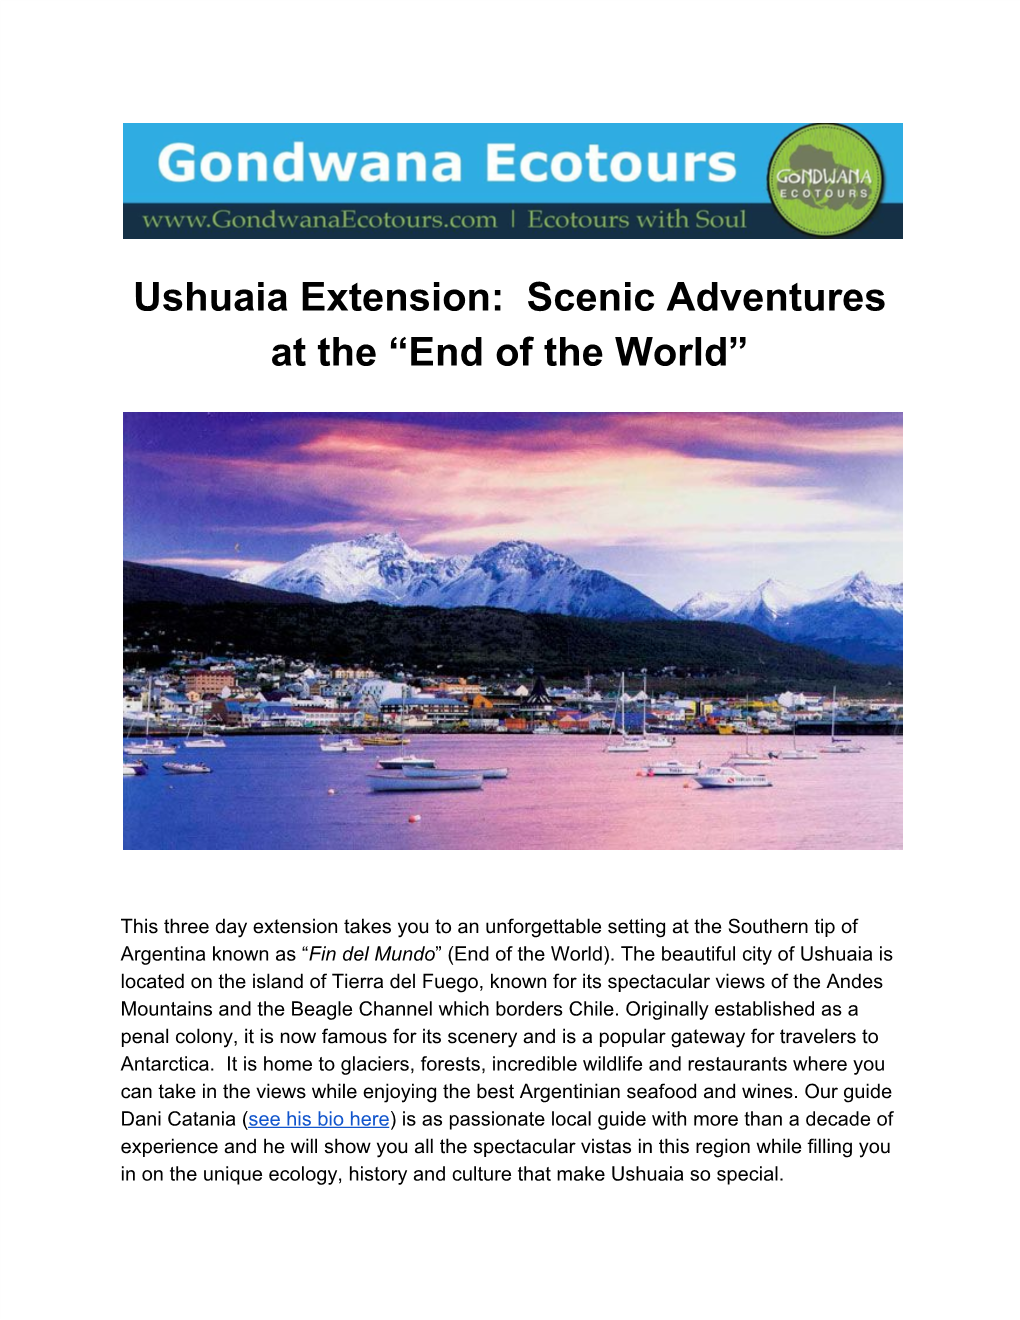 Ushuaia Extension: Scenic Adventures at the “End of the World”